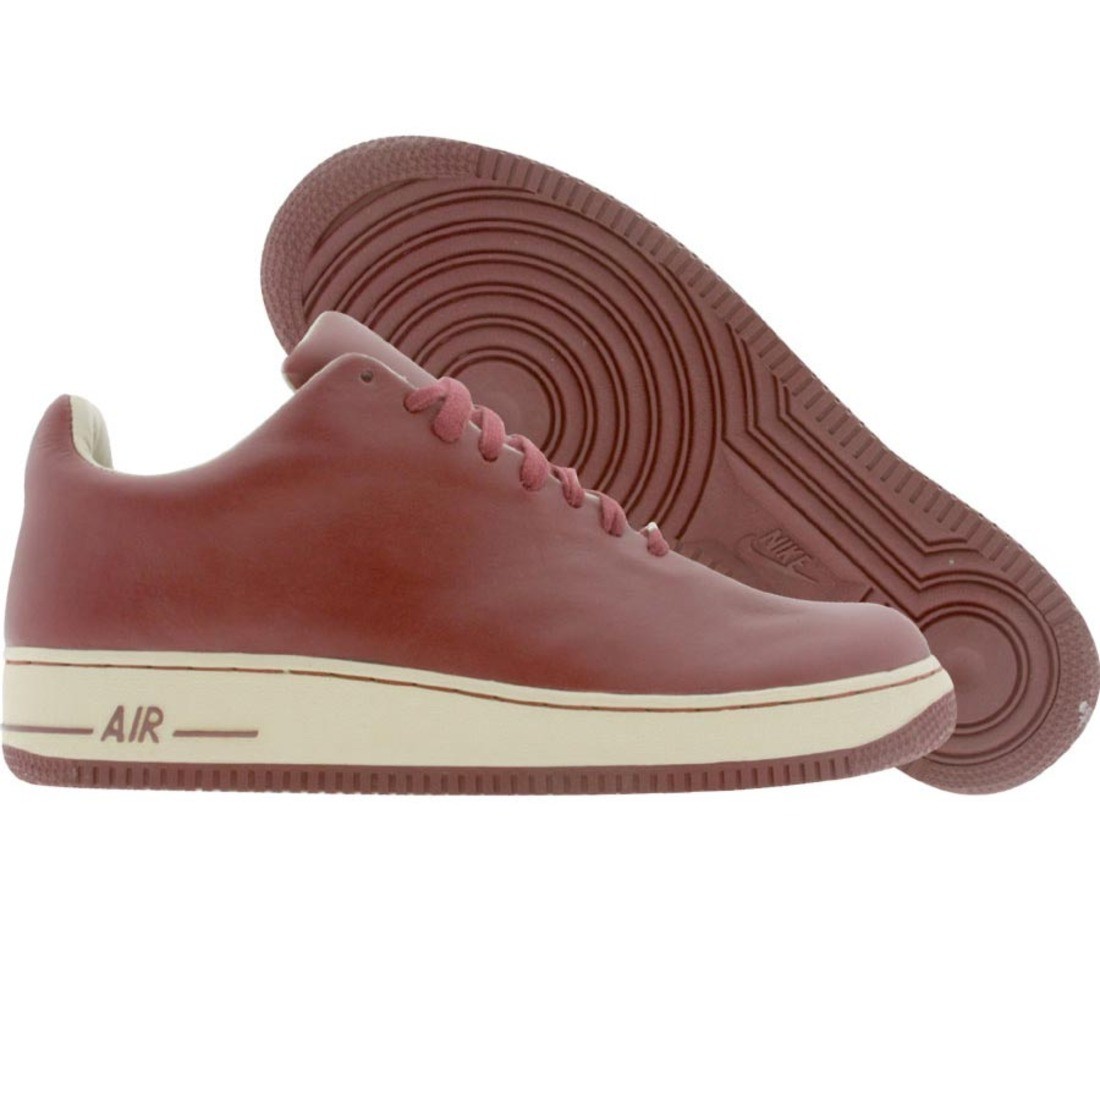 Nike Air Force 1 Low LTD (Seamless Edition - team red / net)